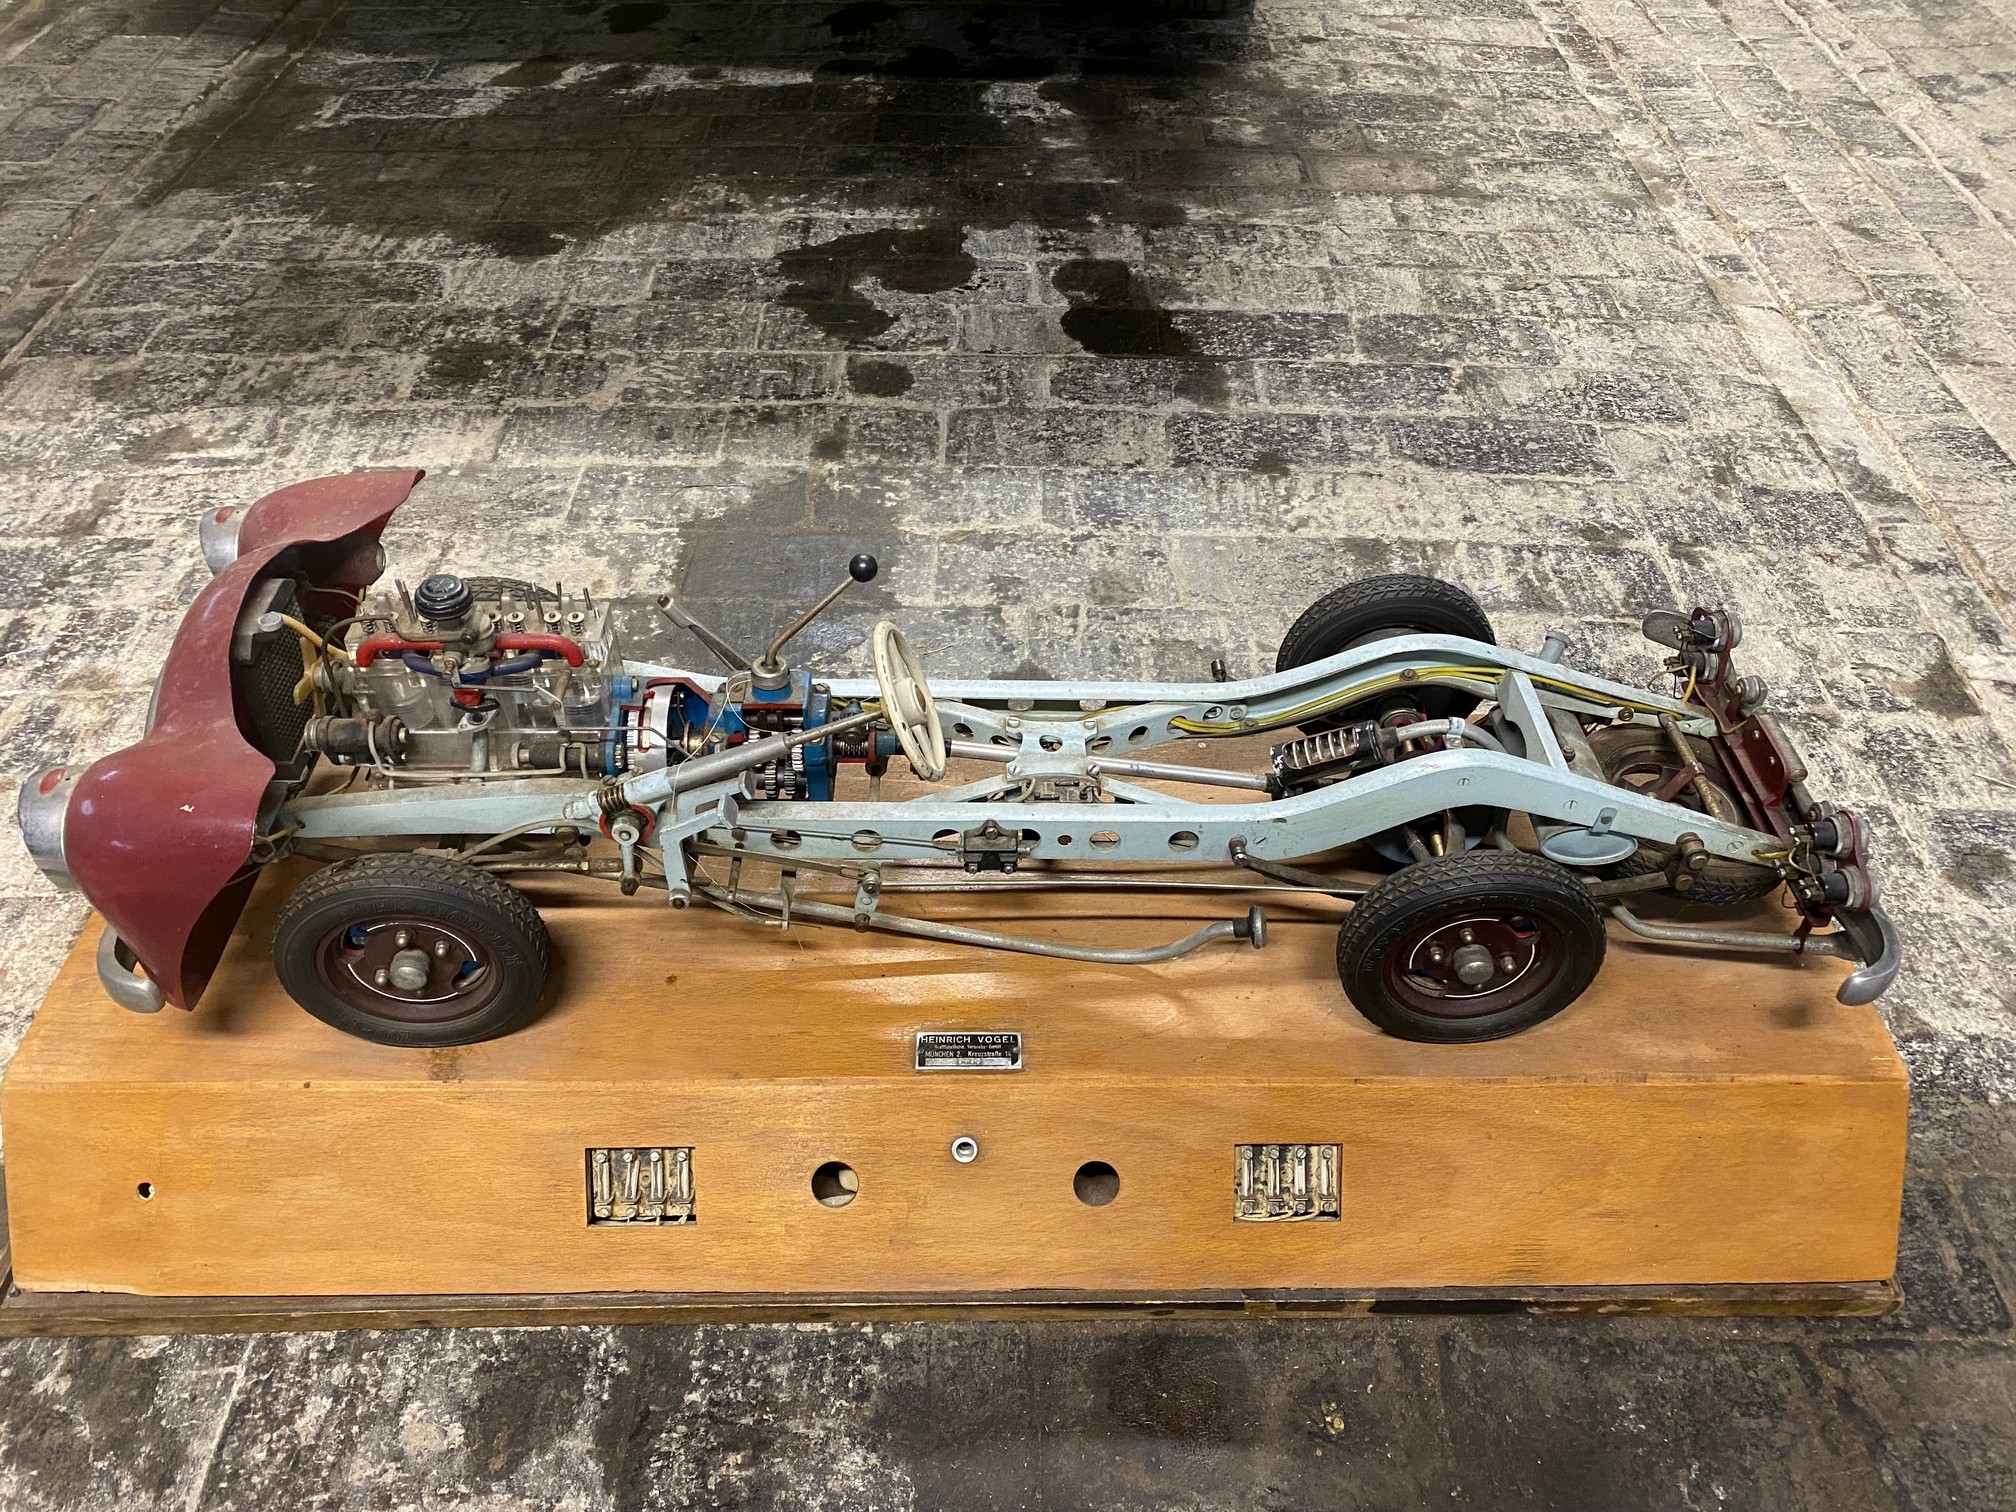 A German cut-away educational scale model of a commercial vehicle chassis, electrified for